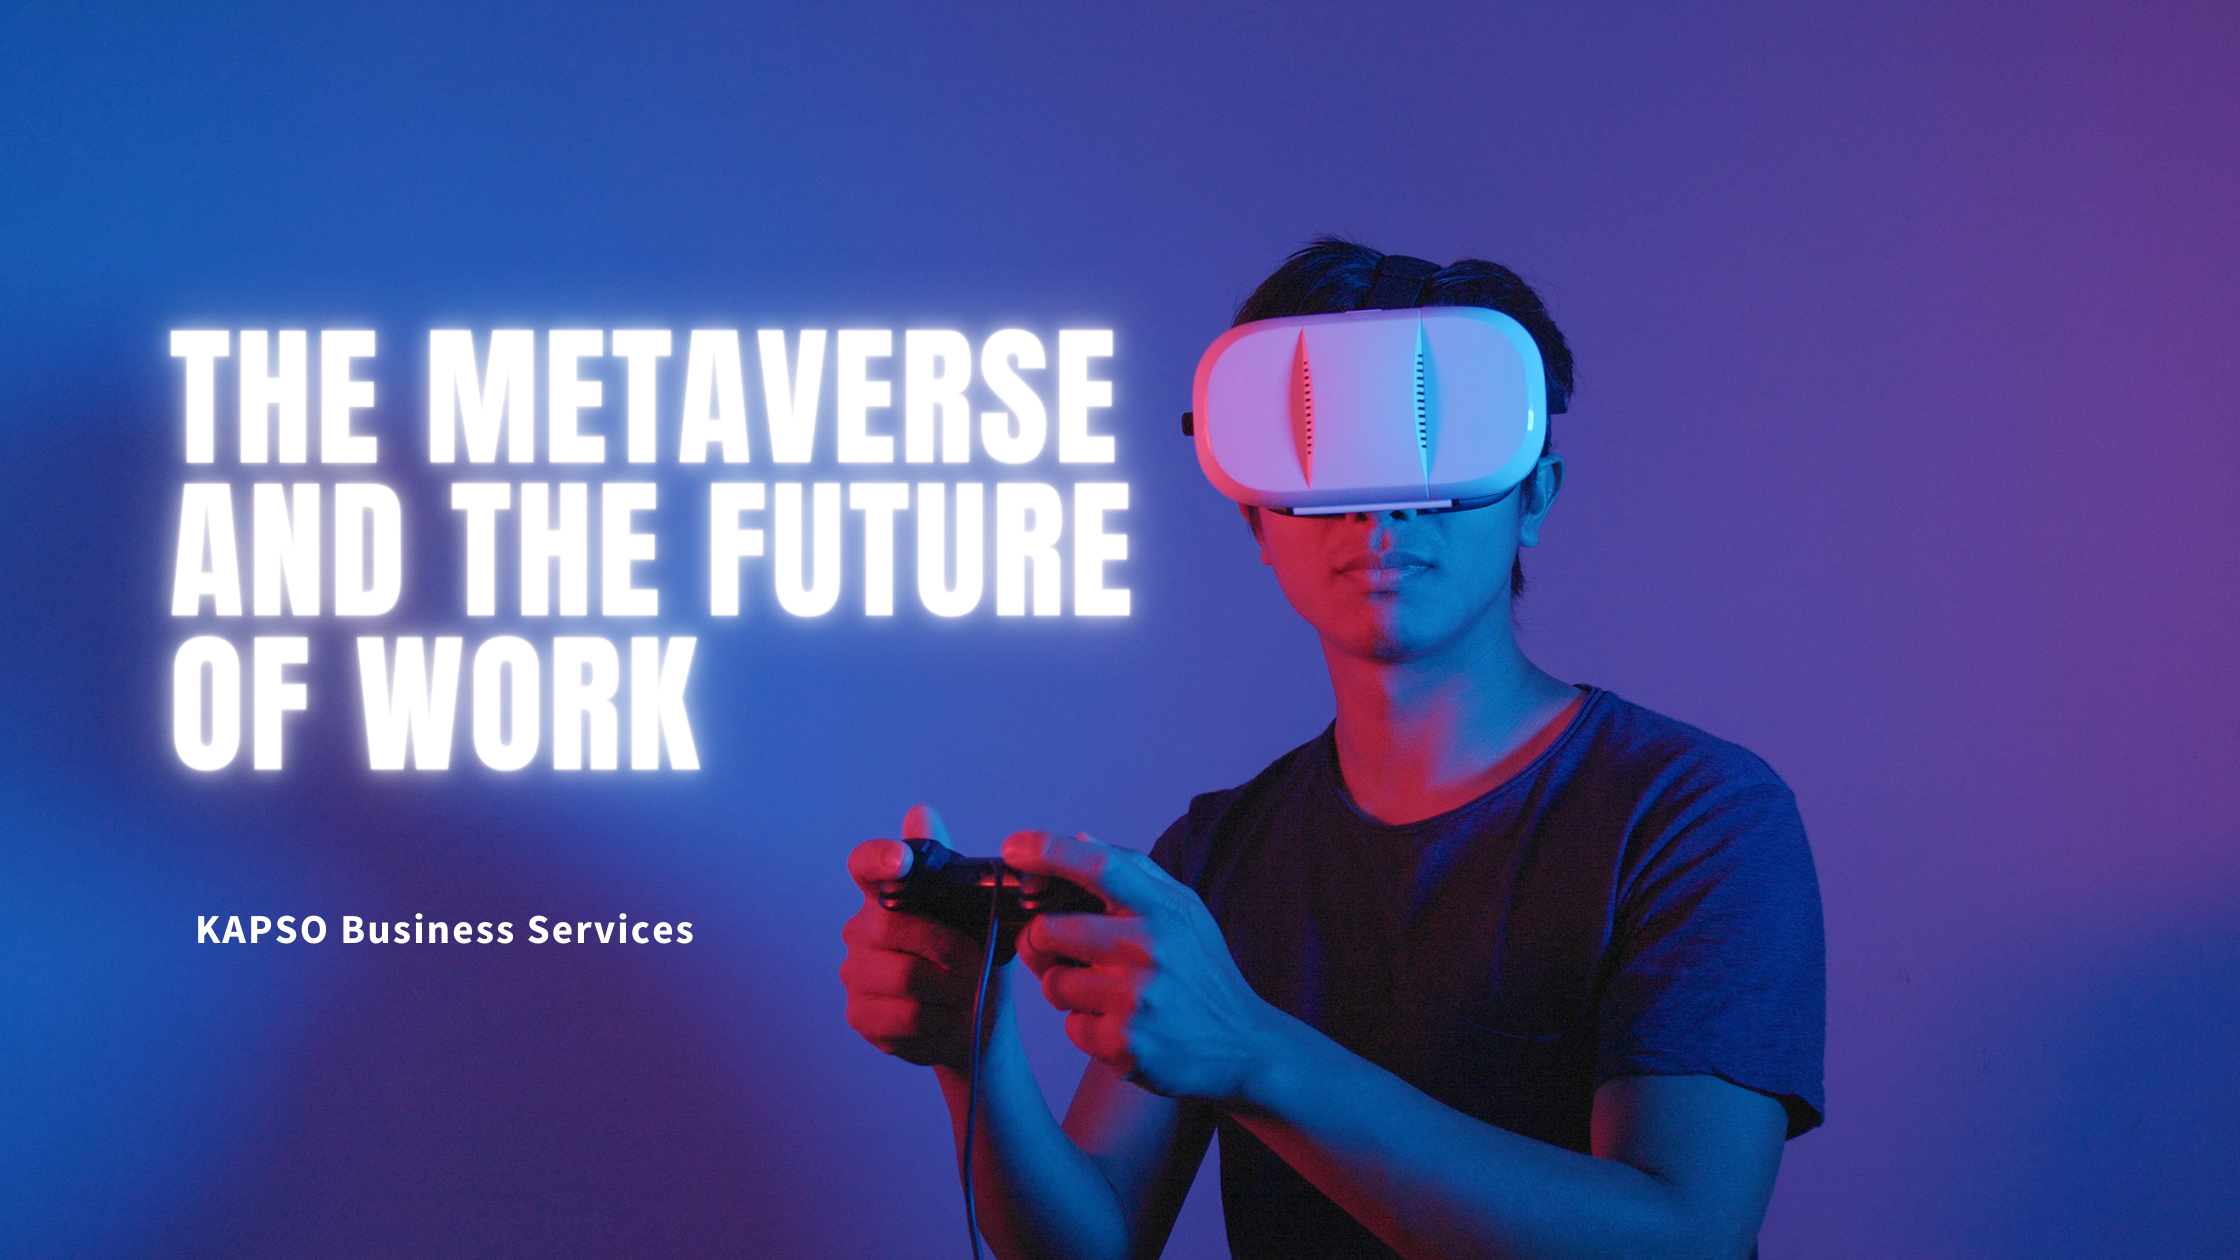 The metaverse and the future of work